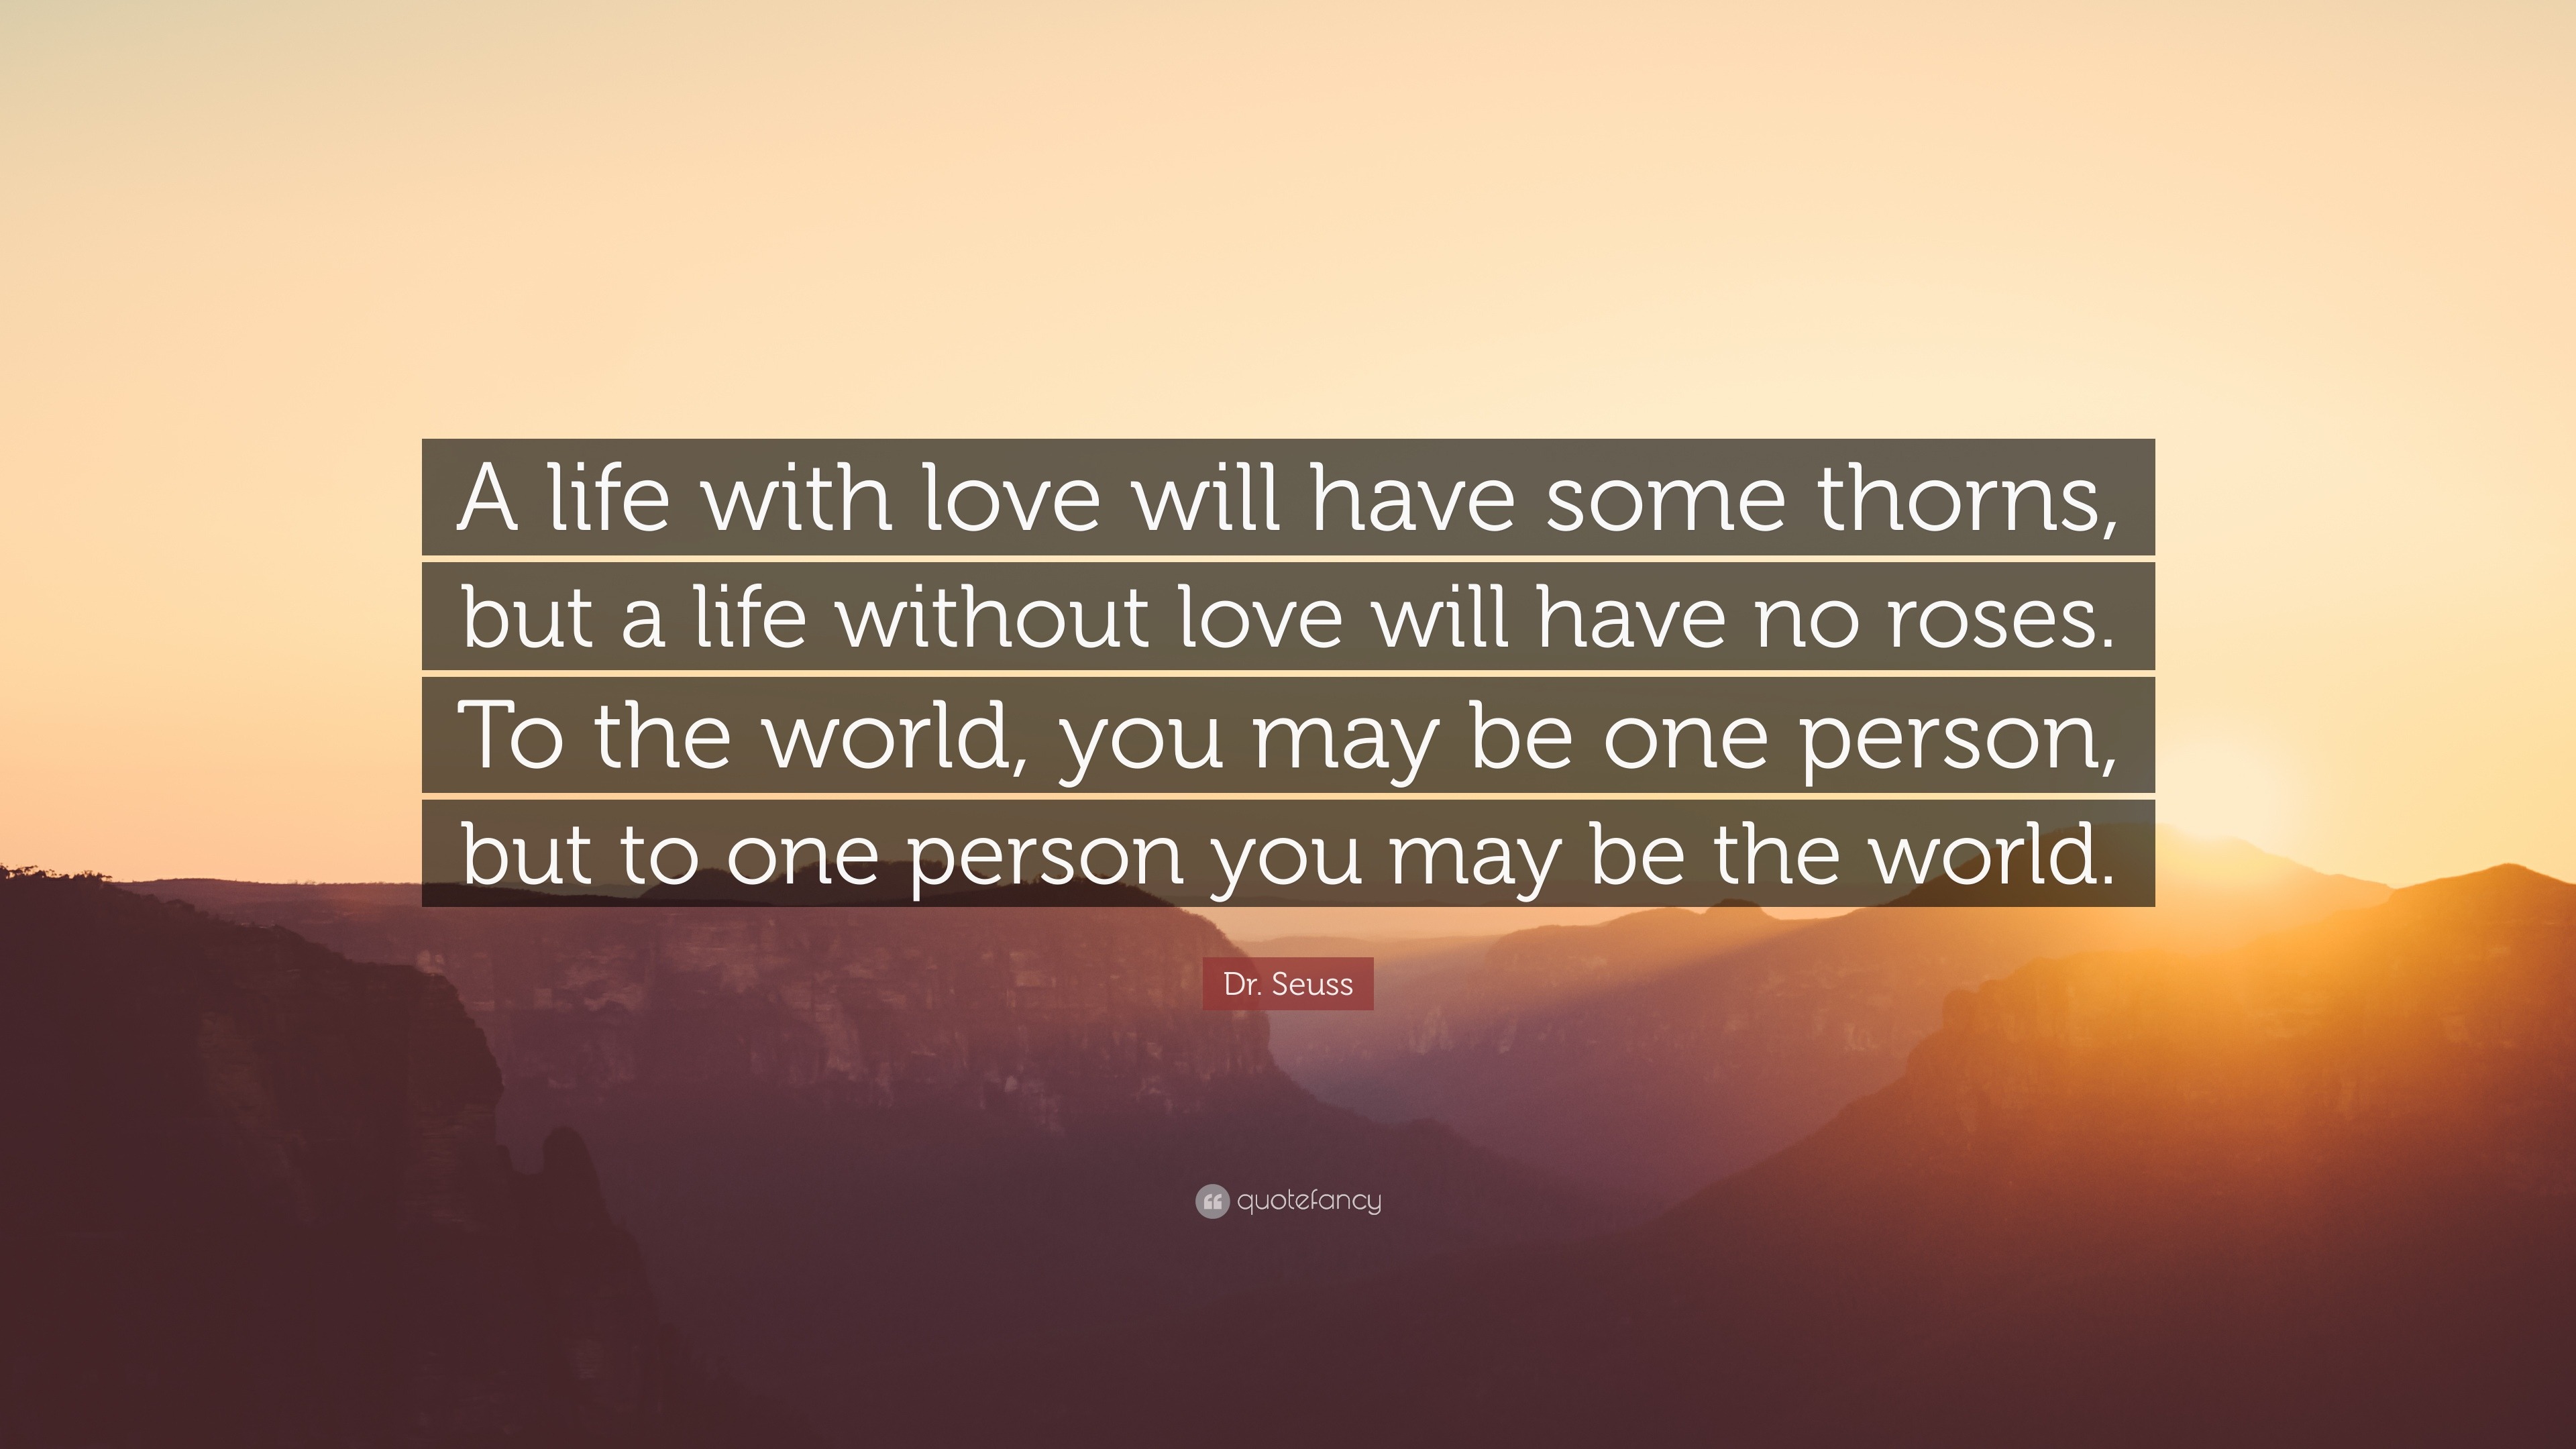 Dr. Seuss Quote: “A life with love will have some thorns, but a life ...